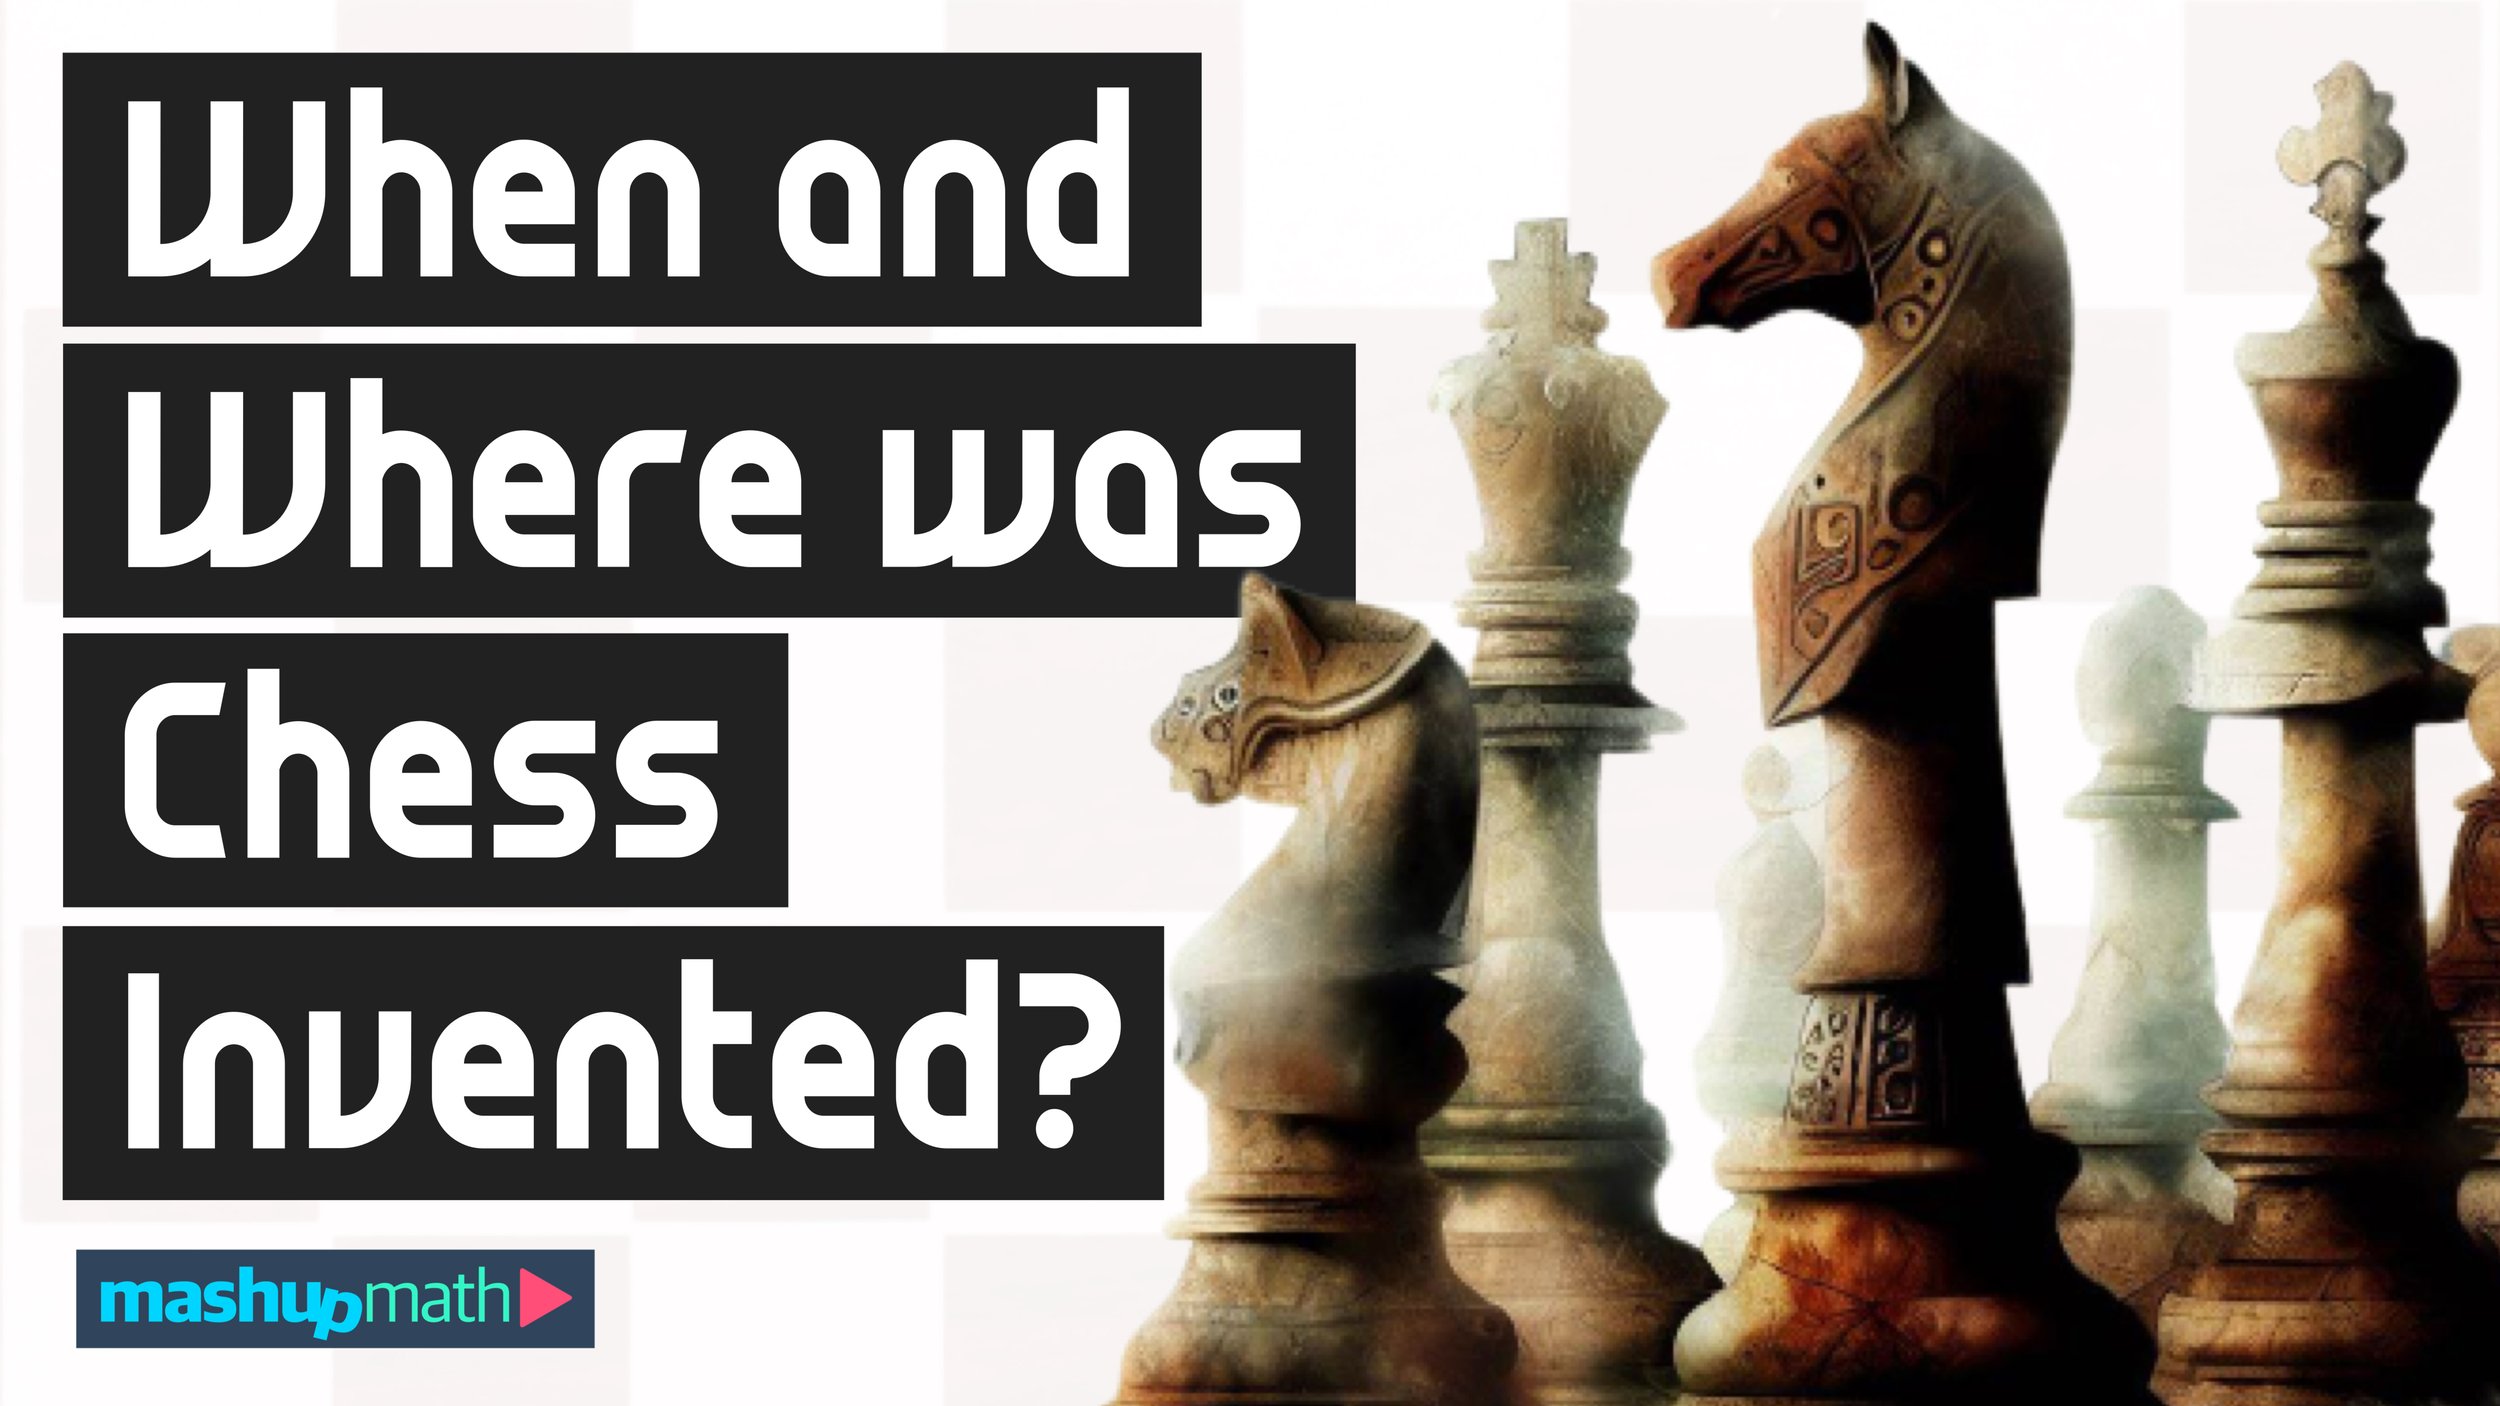 Who Invented Chess?